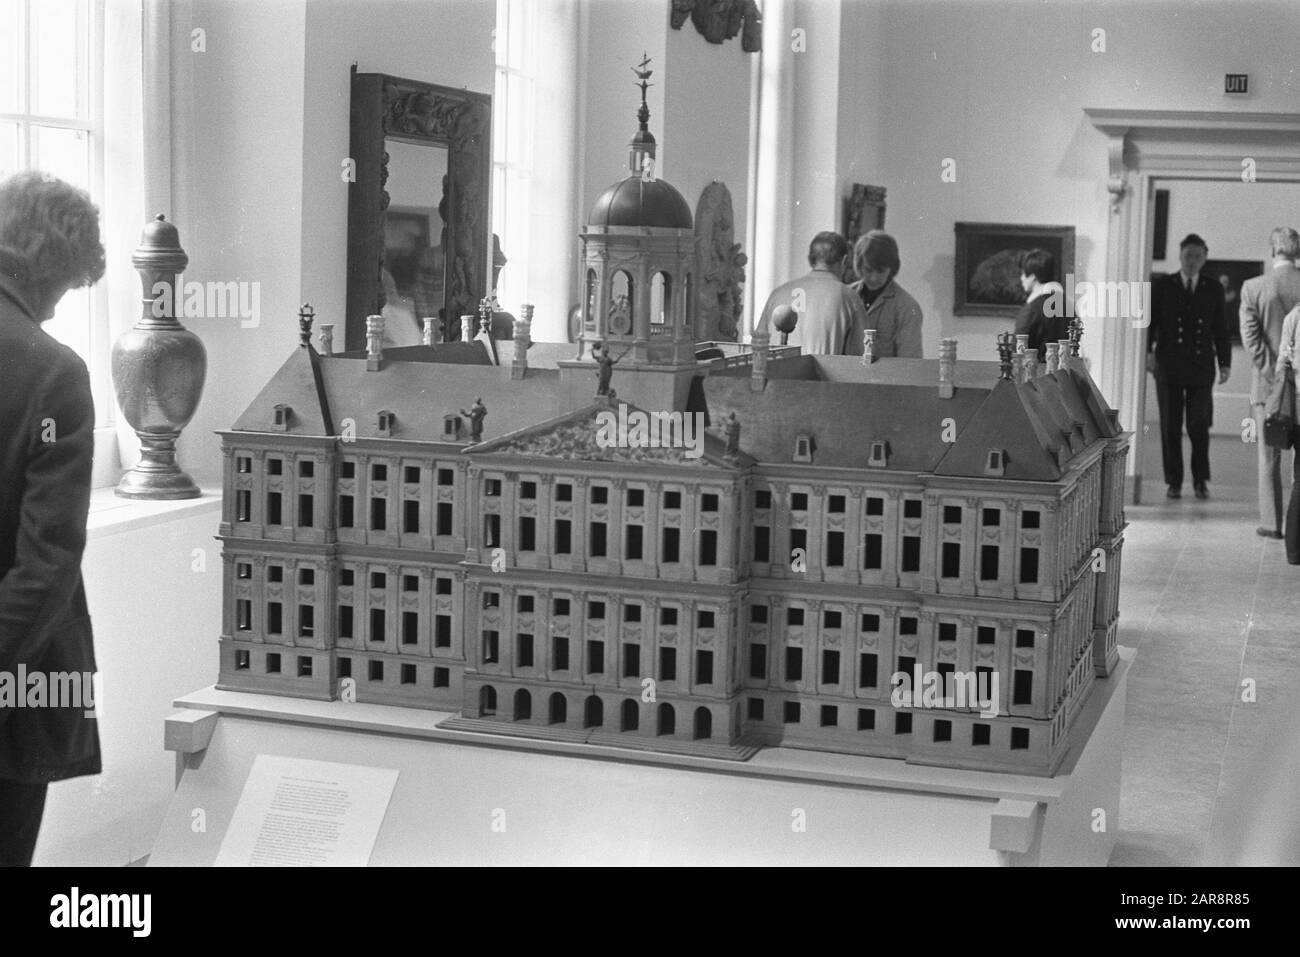 Exhibition Amsterdam die Grote Stad, model of town hall in 1648 Date: 29 March 1973 Keywords: scale models, city halls, exhibitions Stock Photo